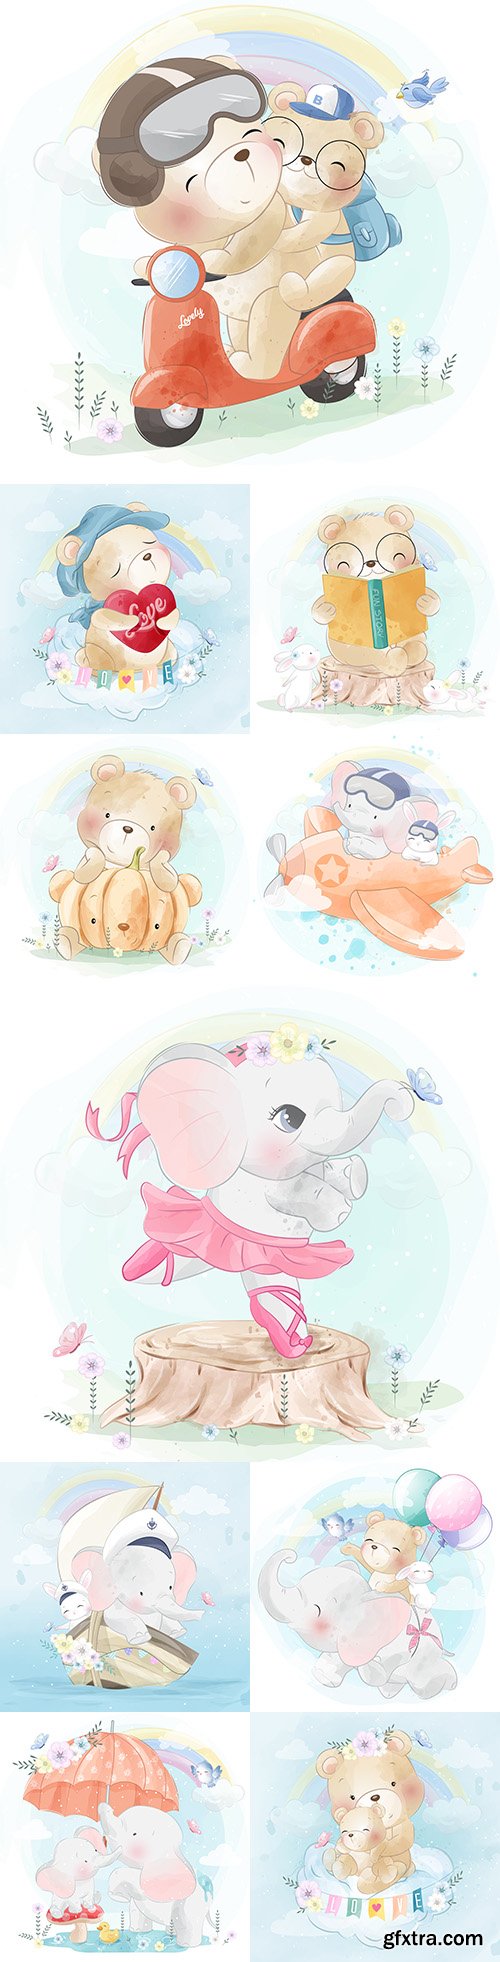 Baby elephant and bear funny drawn illustrations